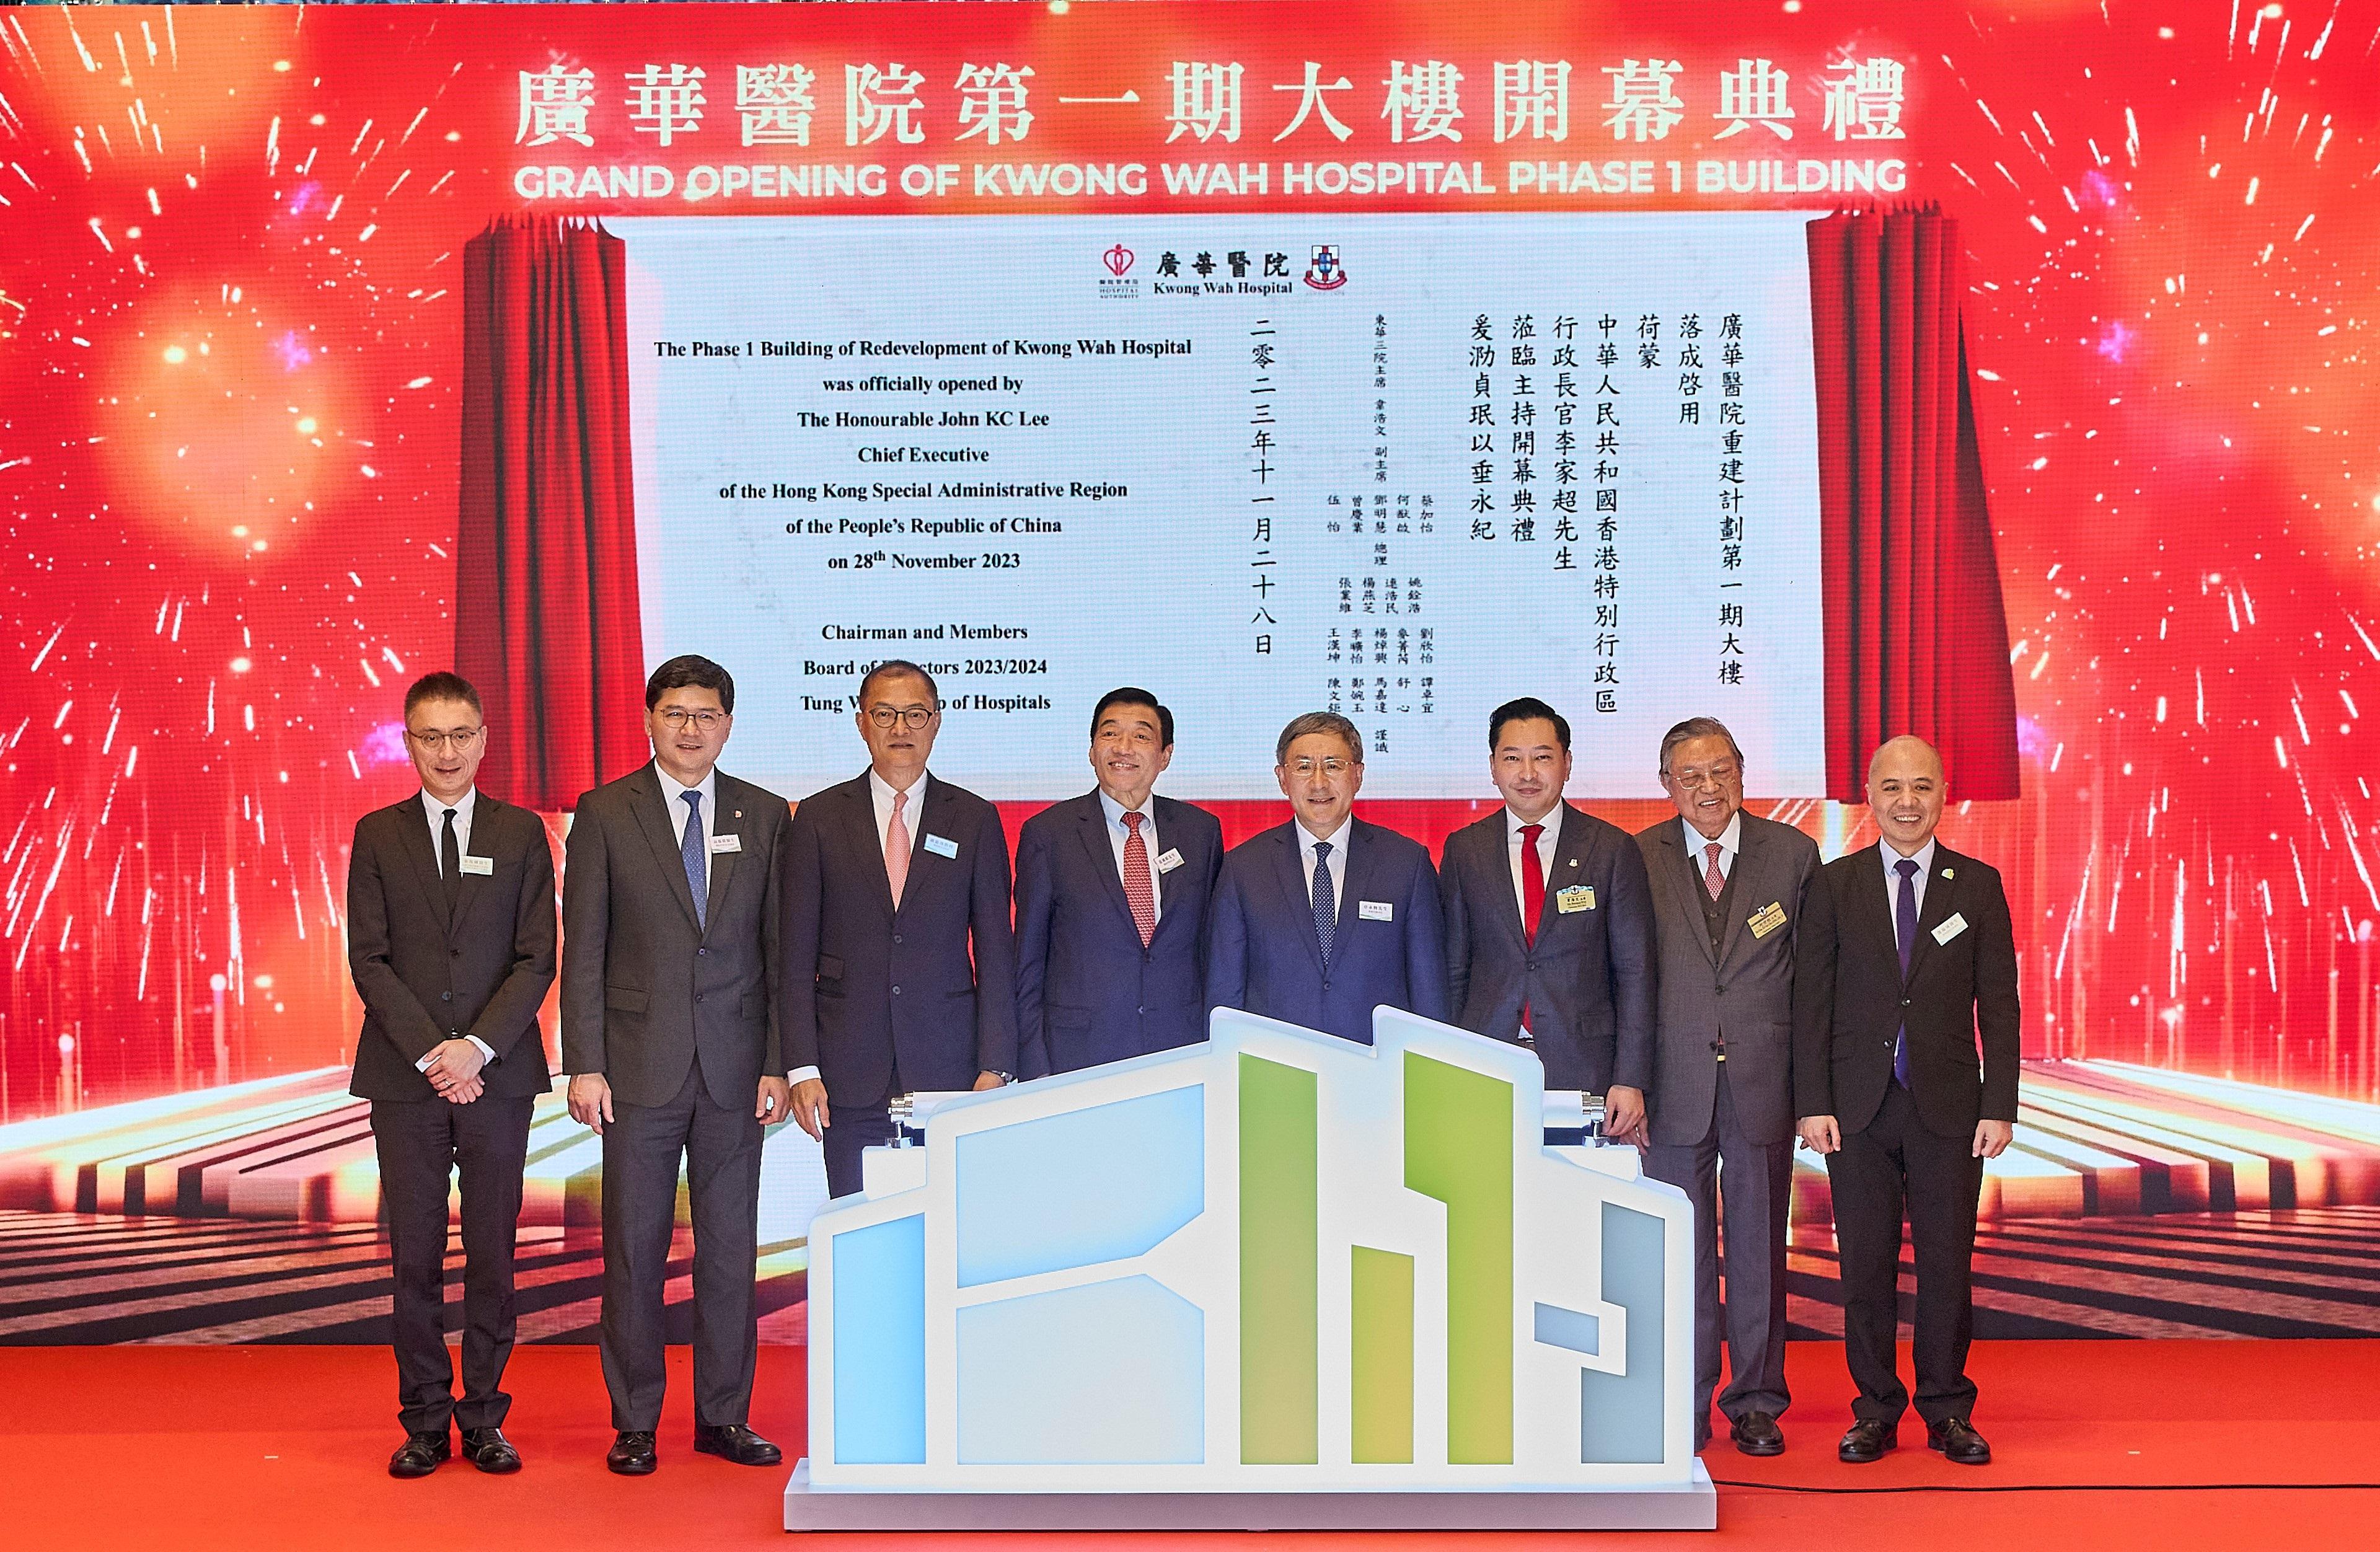 The Deputy Chief Secretary for Administration, Mr Cheuk Wing-hing, officiated at the Grand Opening of Kwong Wah Hospital (KWH) Phase 1 Building today (November 28). Photo shows (from left) the Cluster Chief Executive of Kowloon Central Cluster, Dr Eric Cheung; the Chief Executive of the Hospital Authority (HA), Dr Tony Ko; the Secretary for Health, Professor Lo Chung-mau; the Chairman of the HA, Mr Henry Fan; the Deputy Chief Secretary for Administration, Mr Cheuk Wing-hing; the Chairman of Tung Wah Group of Hospitals (TWGHs) (2023-24) and the Hospital Governing Committee of KWH, Mr Herman Wai; the Chairman of TWGHs (1964-1965), Mr Ho Sai-chu; and the Hospital Chief Executive of KWH, Dr Tang Kam-shing.